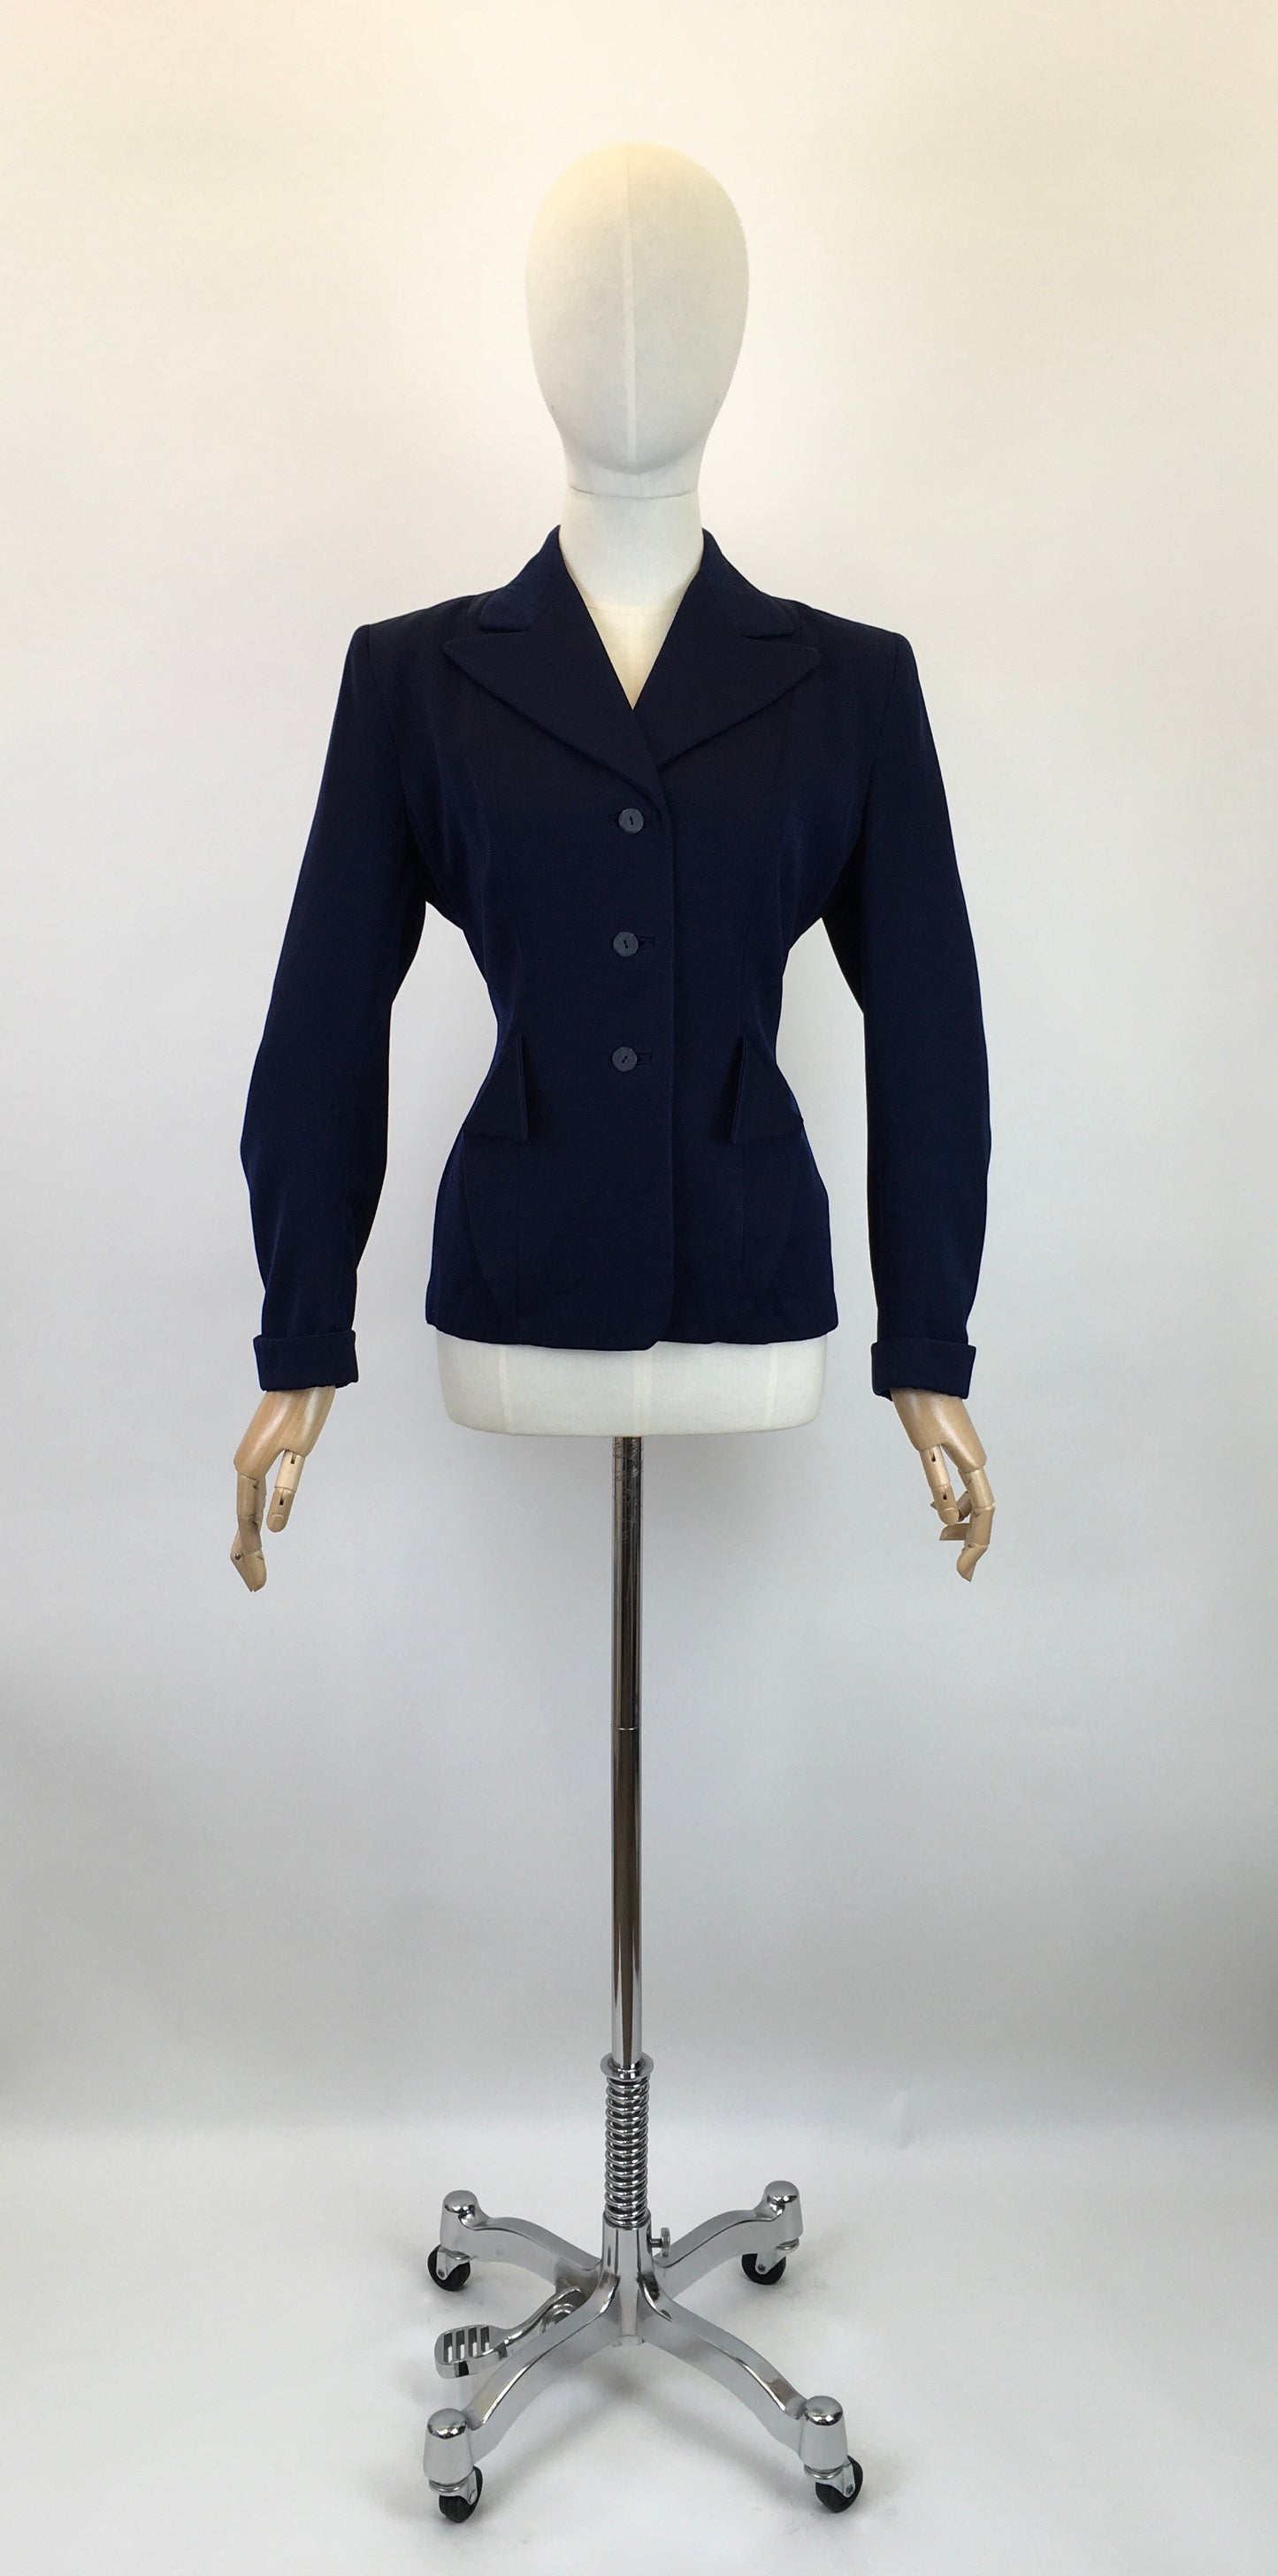 Original 1940’s Beautiful Navy Jacket - With A Classic 1940’s Silhouette and Details